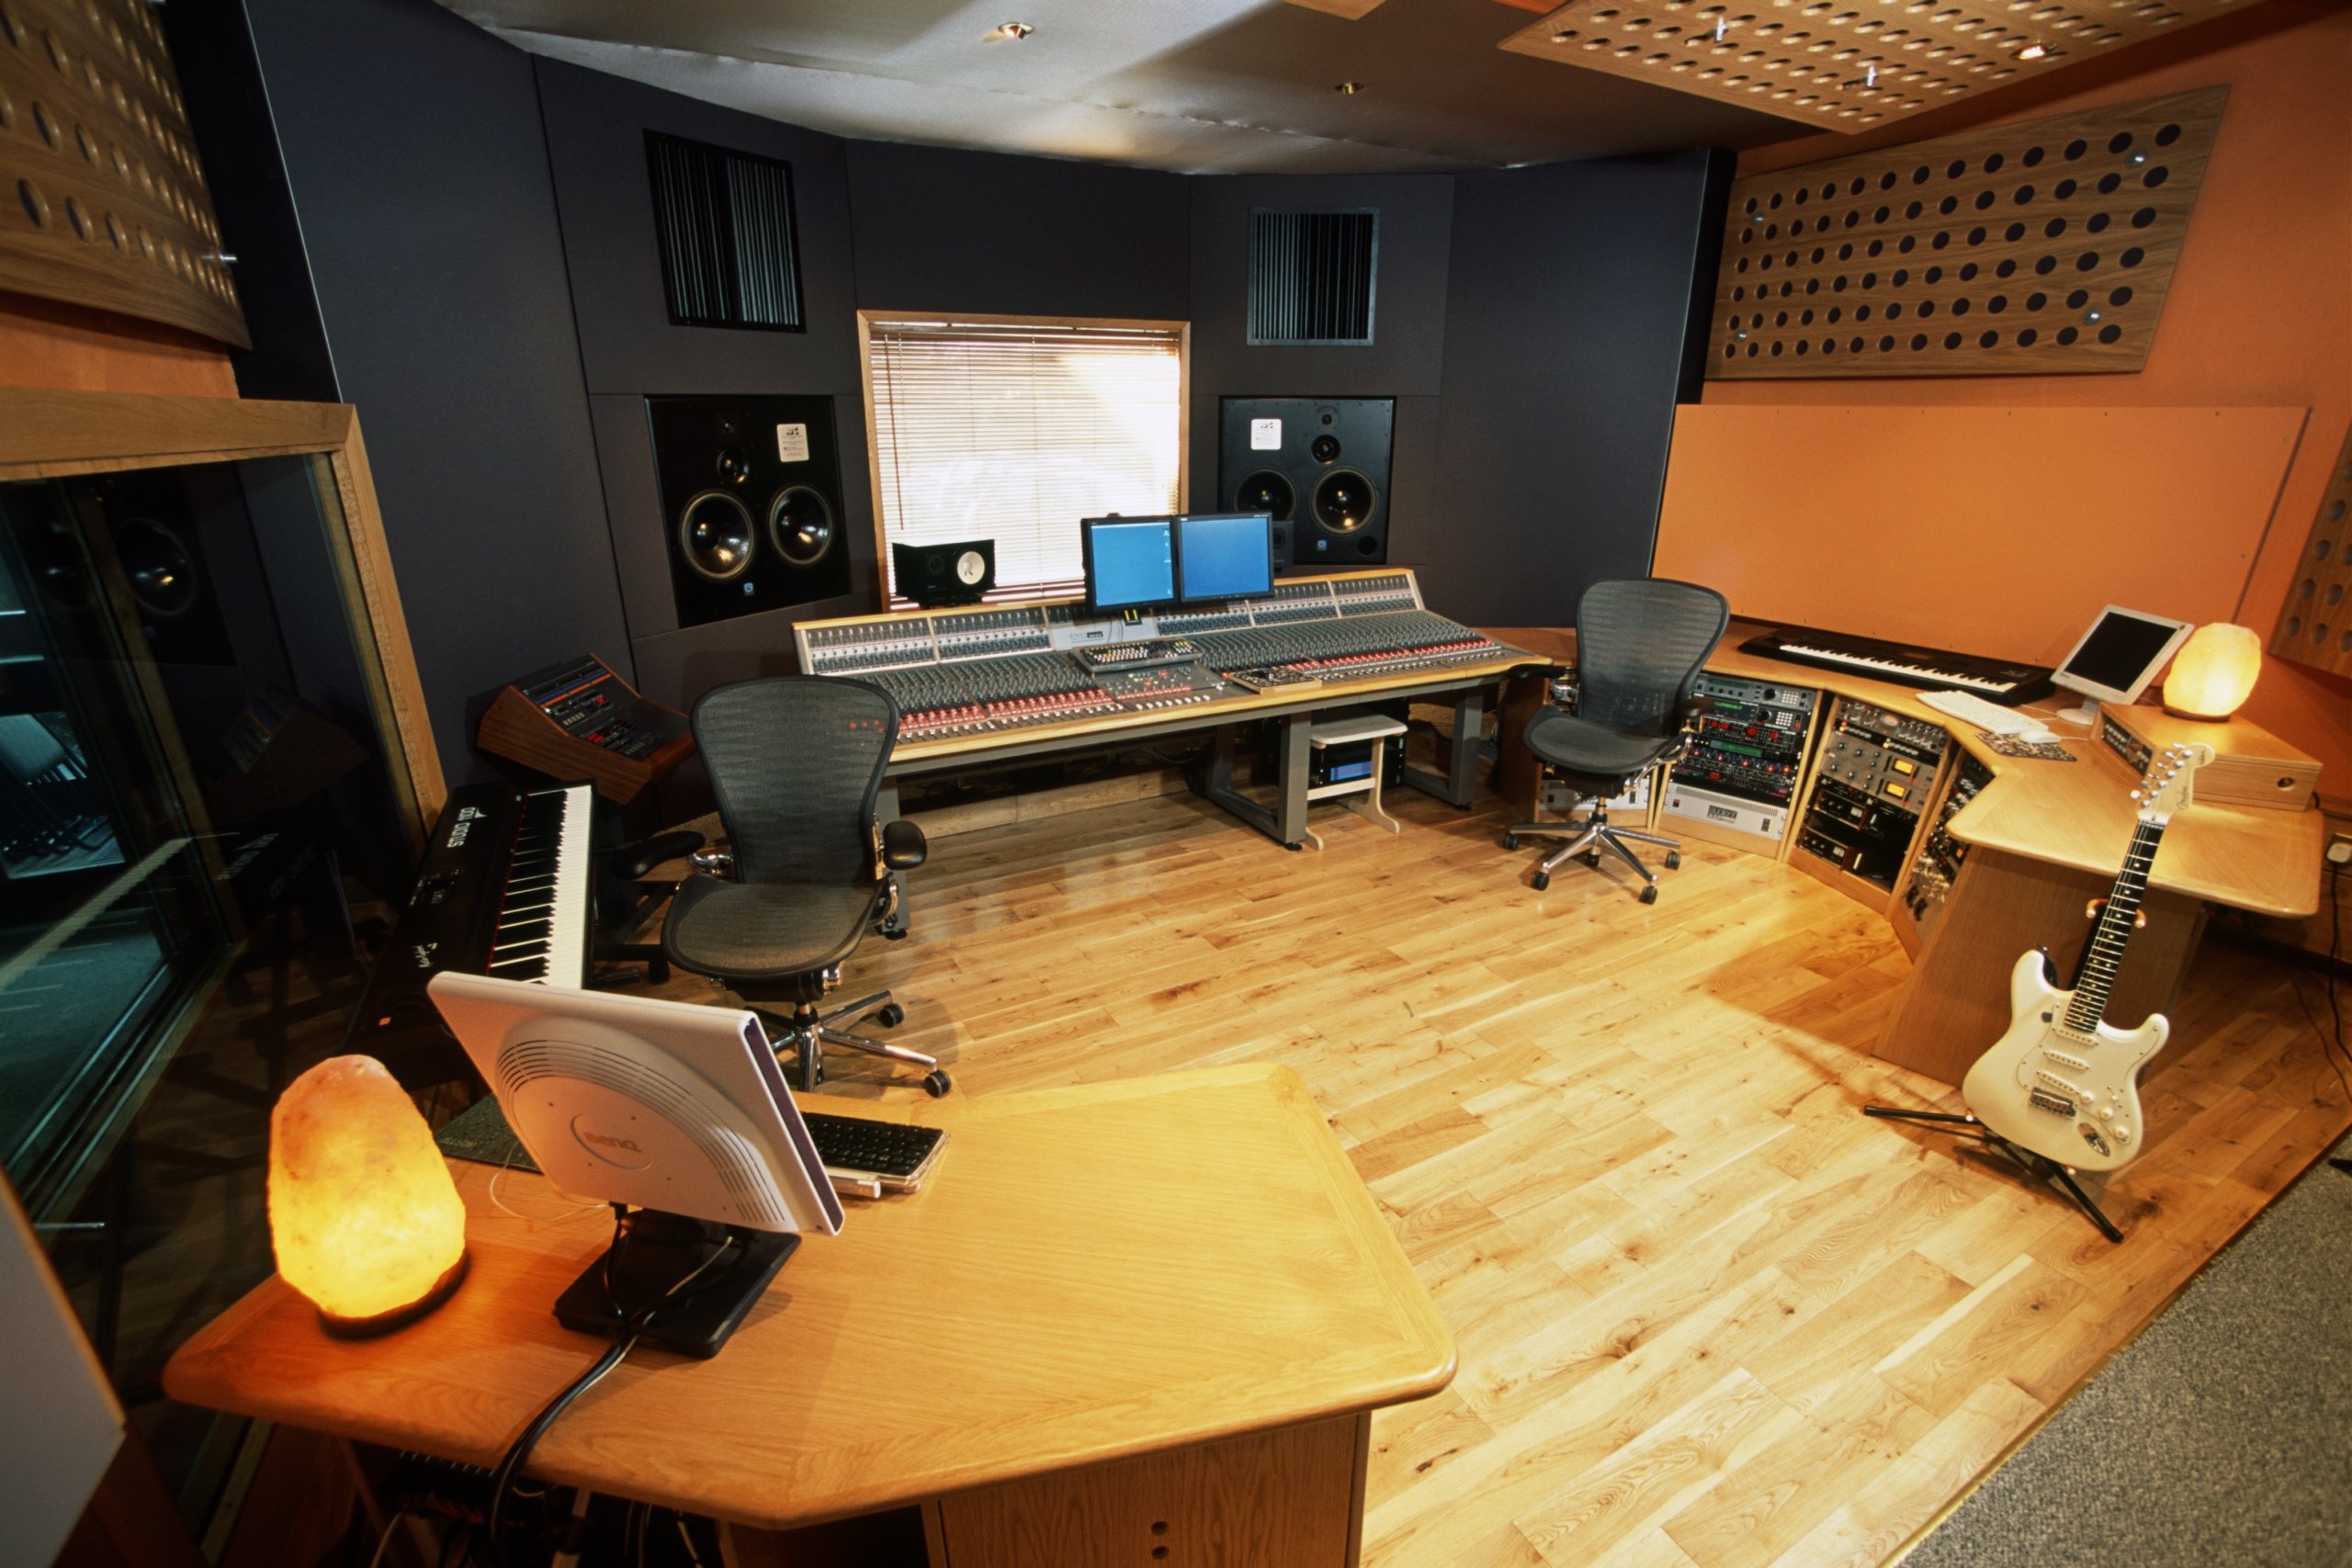 Large recording studio with 60 channel mixing desk at its heart